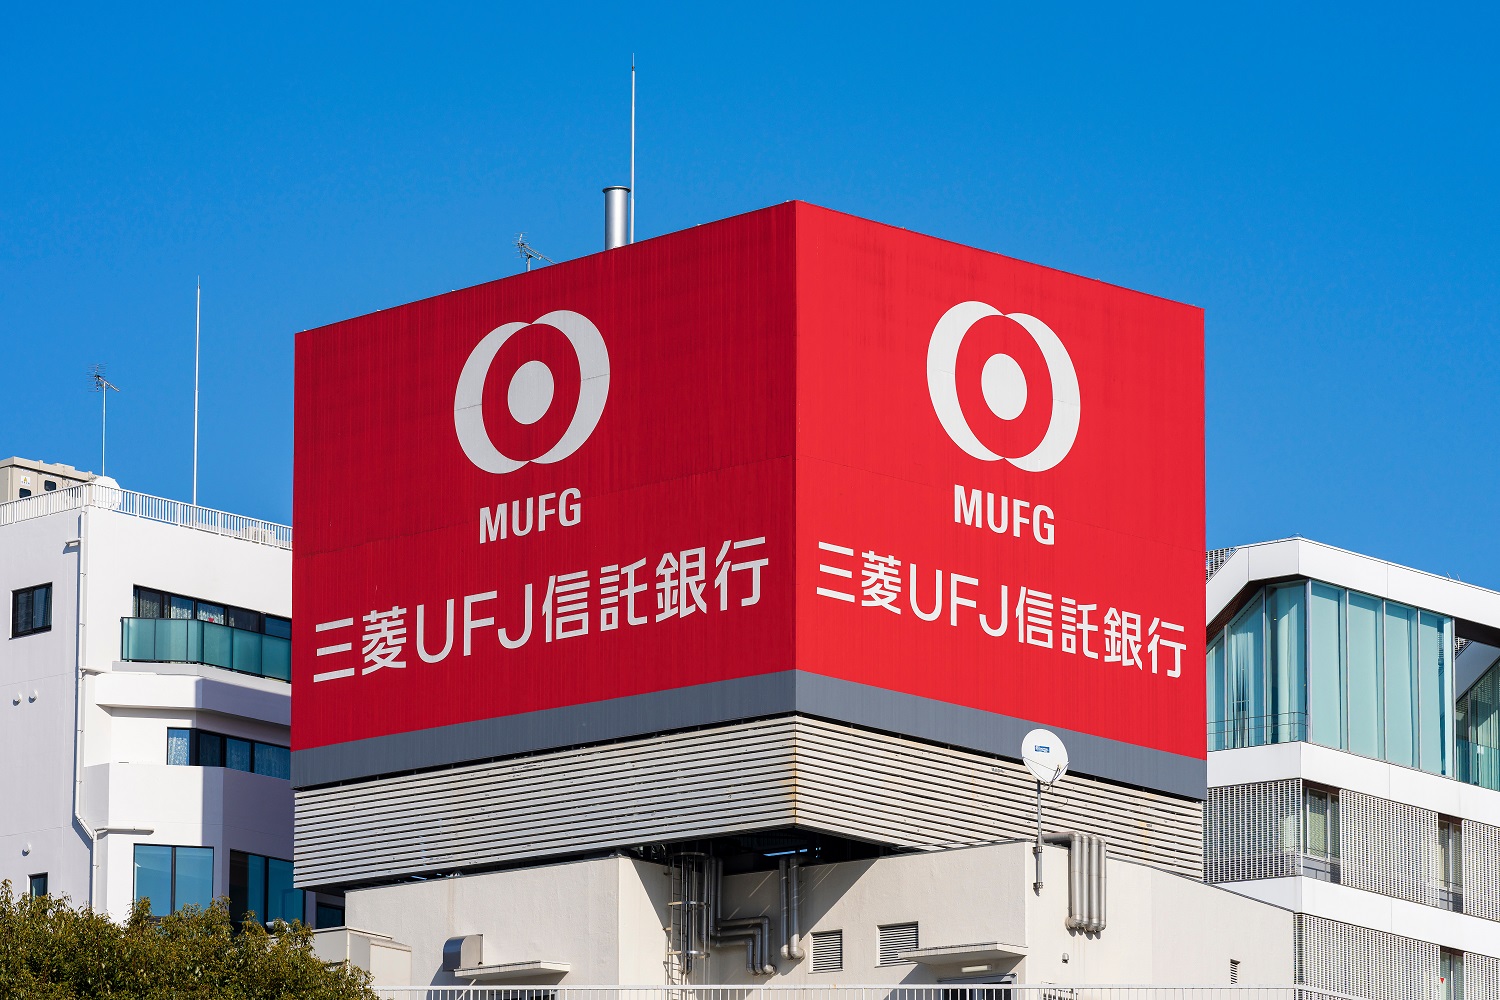 A Japanese building with the Mitsubishi UFJ logo displayed on its exterior.